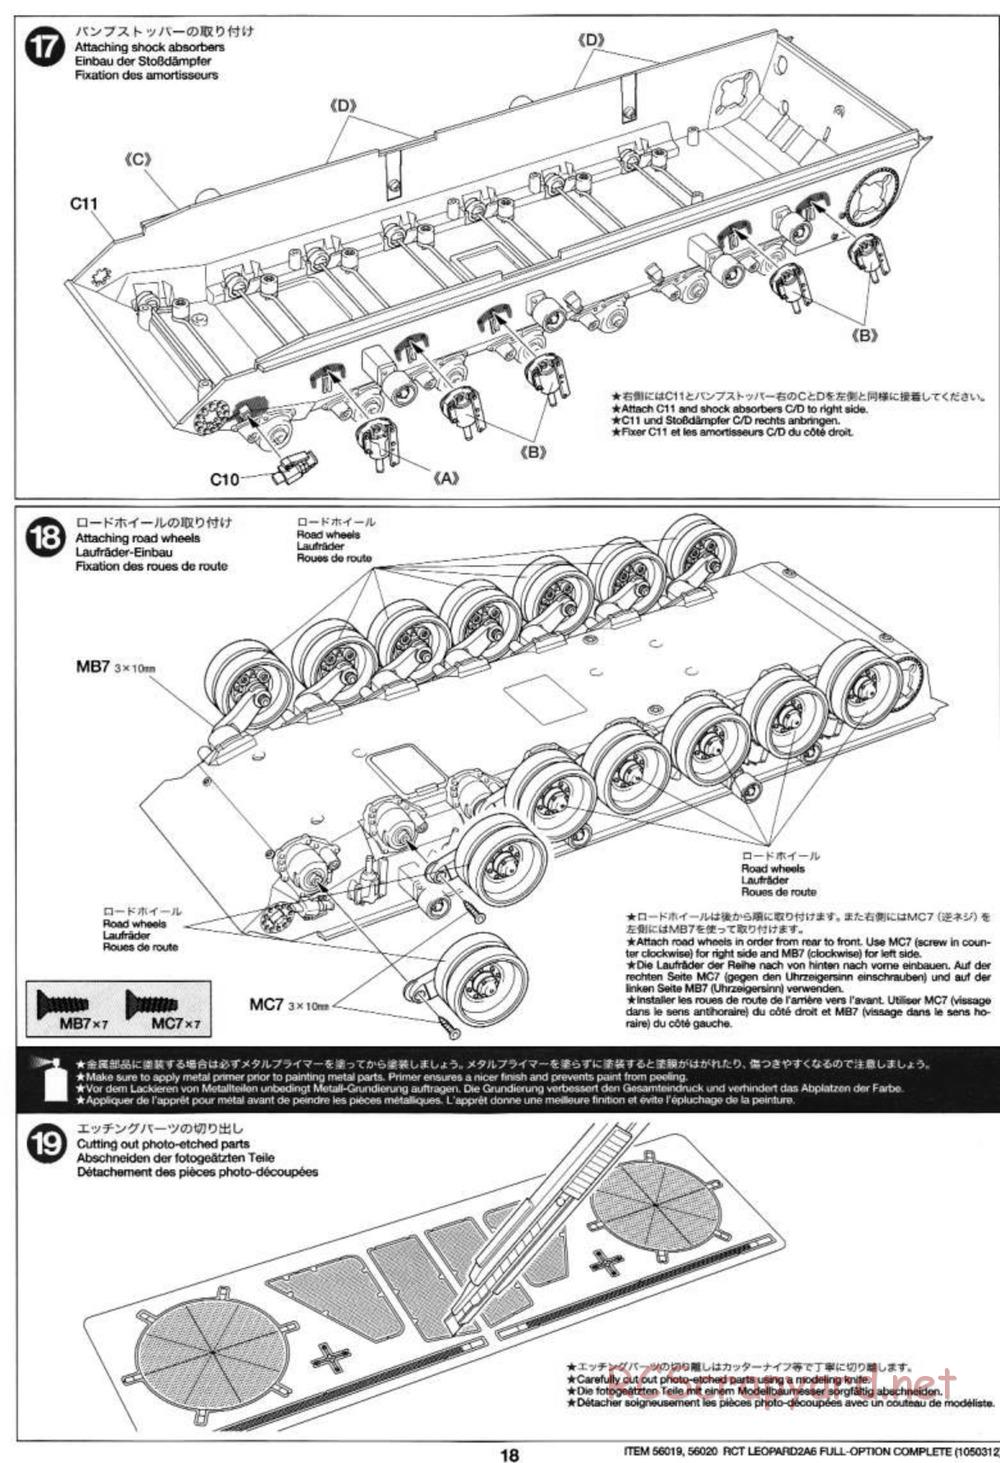 Tamiya - Leopard 2 A6 - 1/16 Scale Chassis - Manual - Page 18